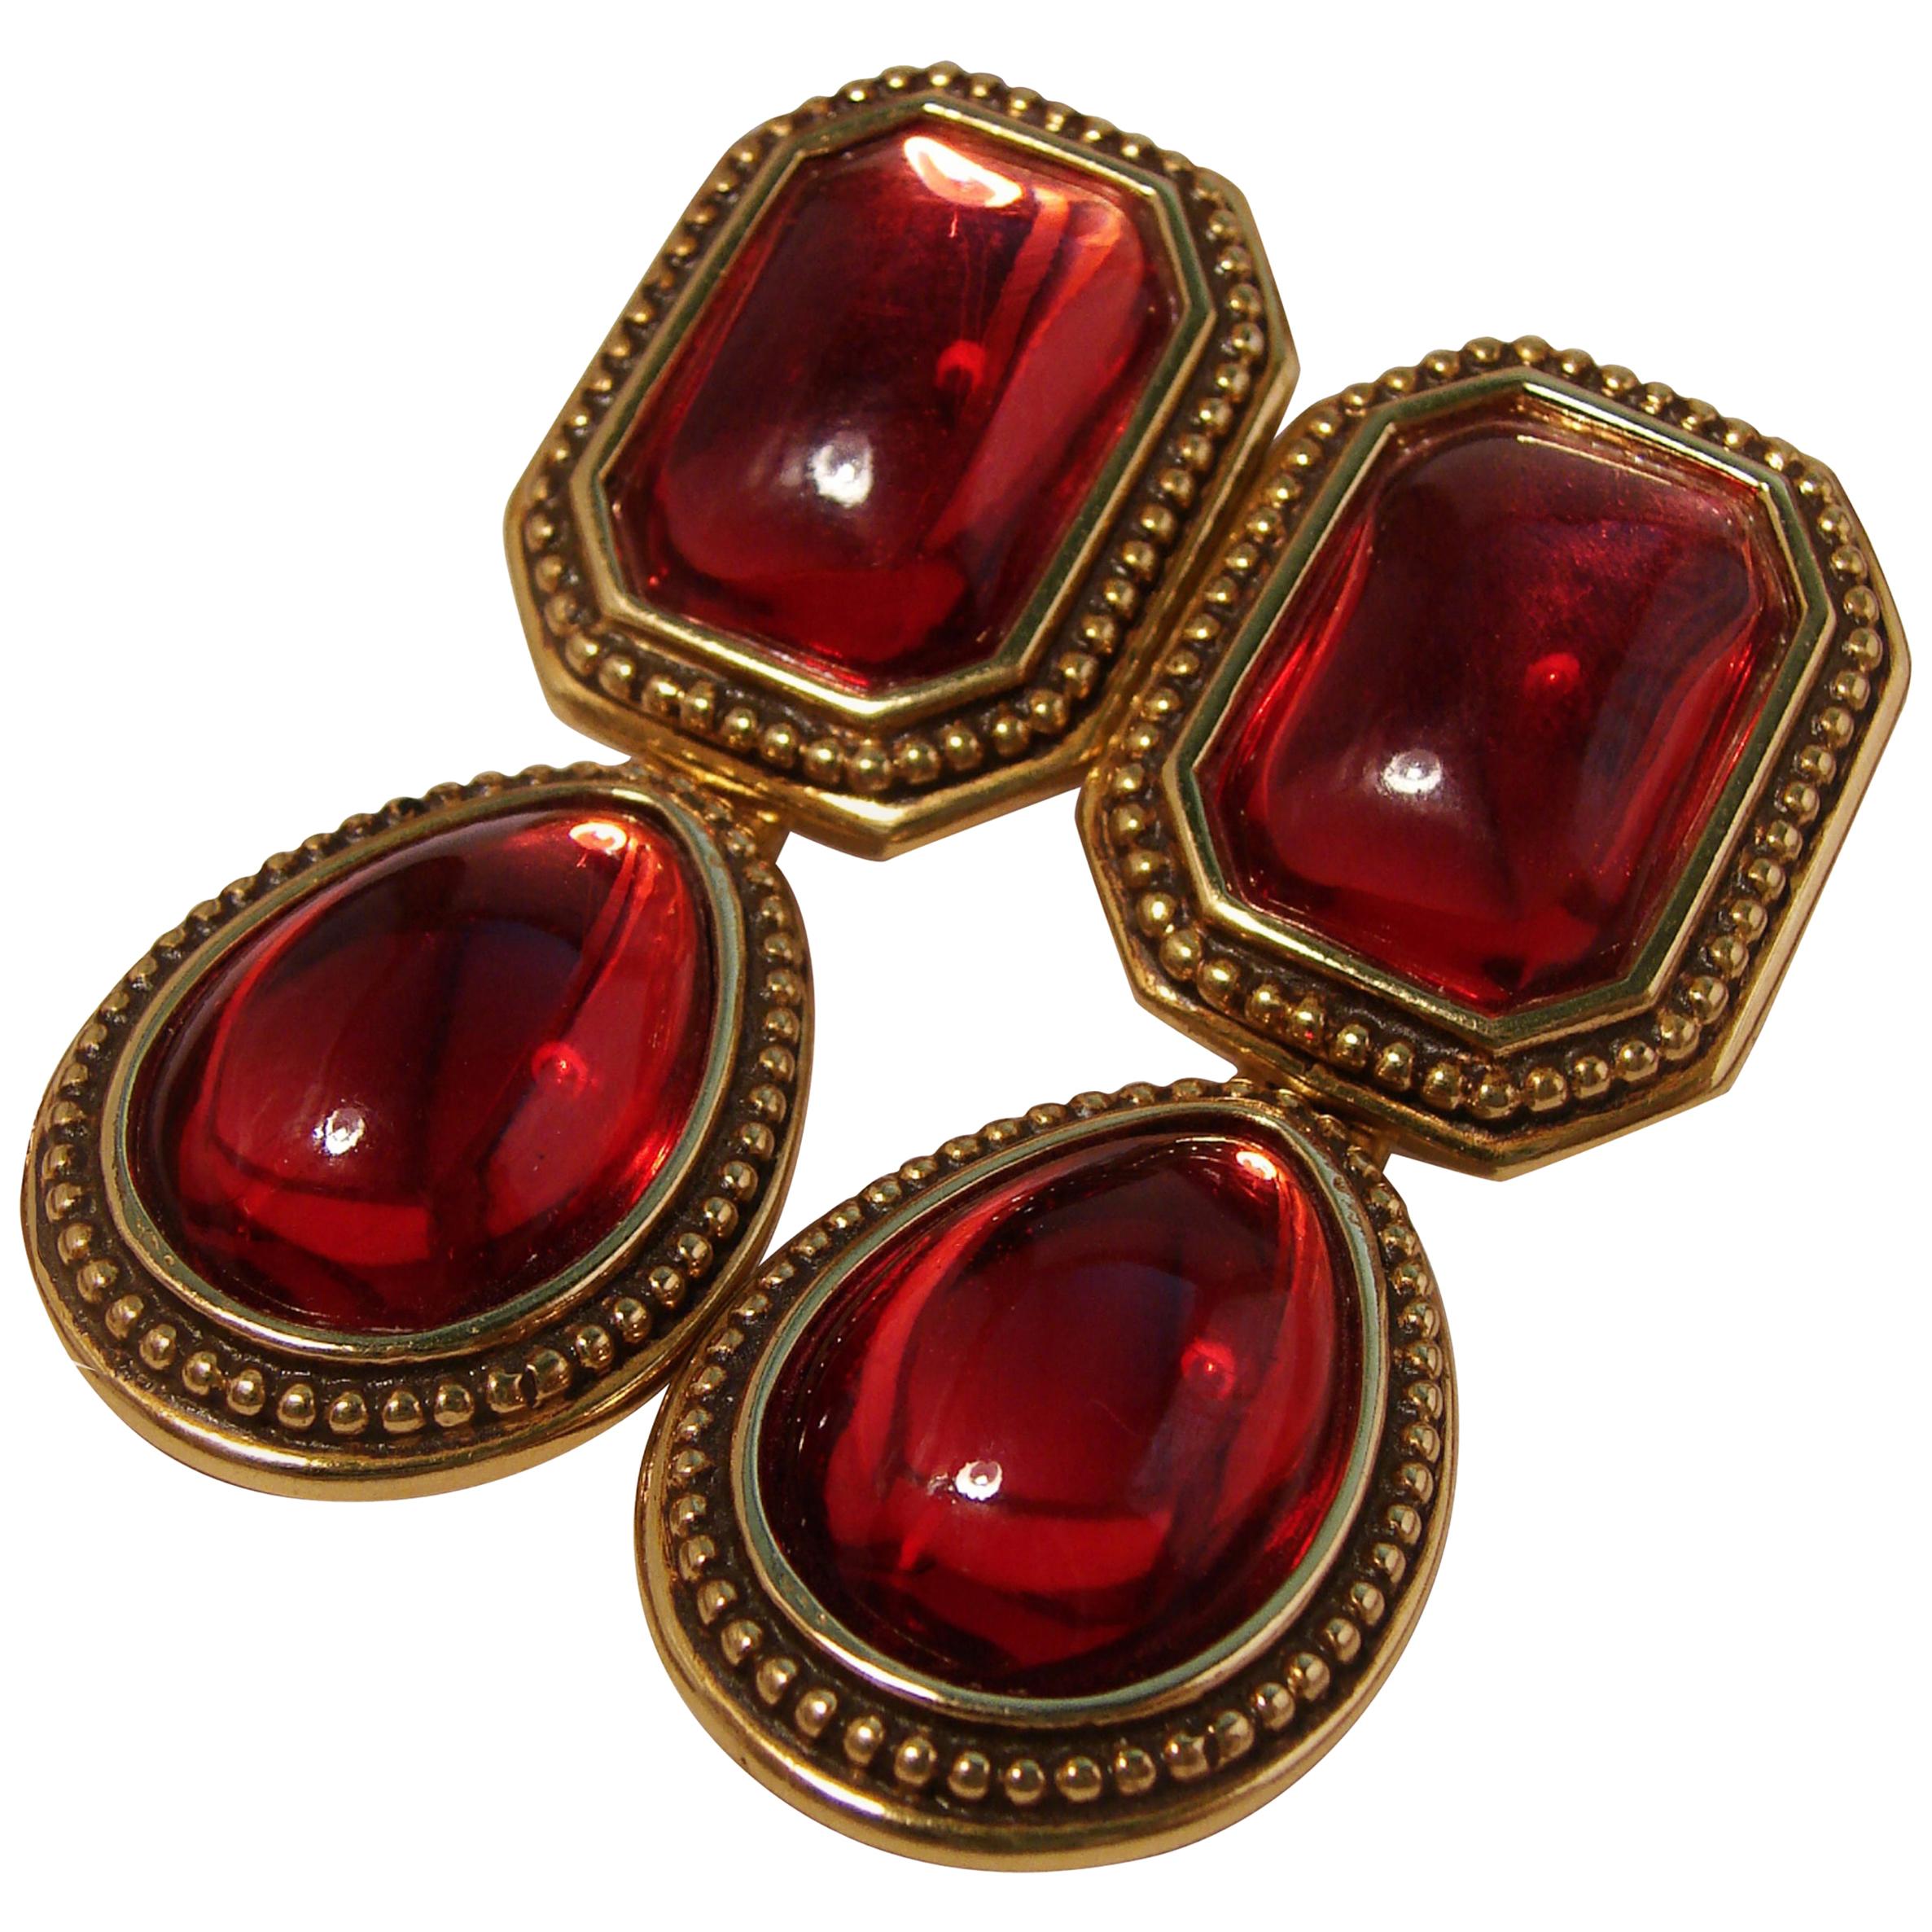 Yves Saint Laurent Earrings Red Glass Cabochon Gold Metal Drop YSL 70s 